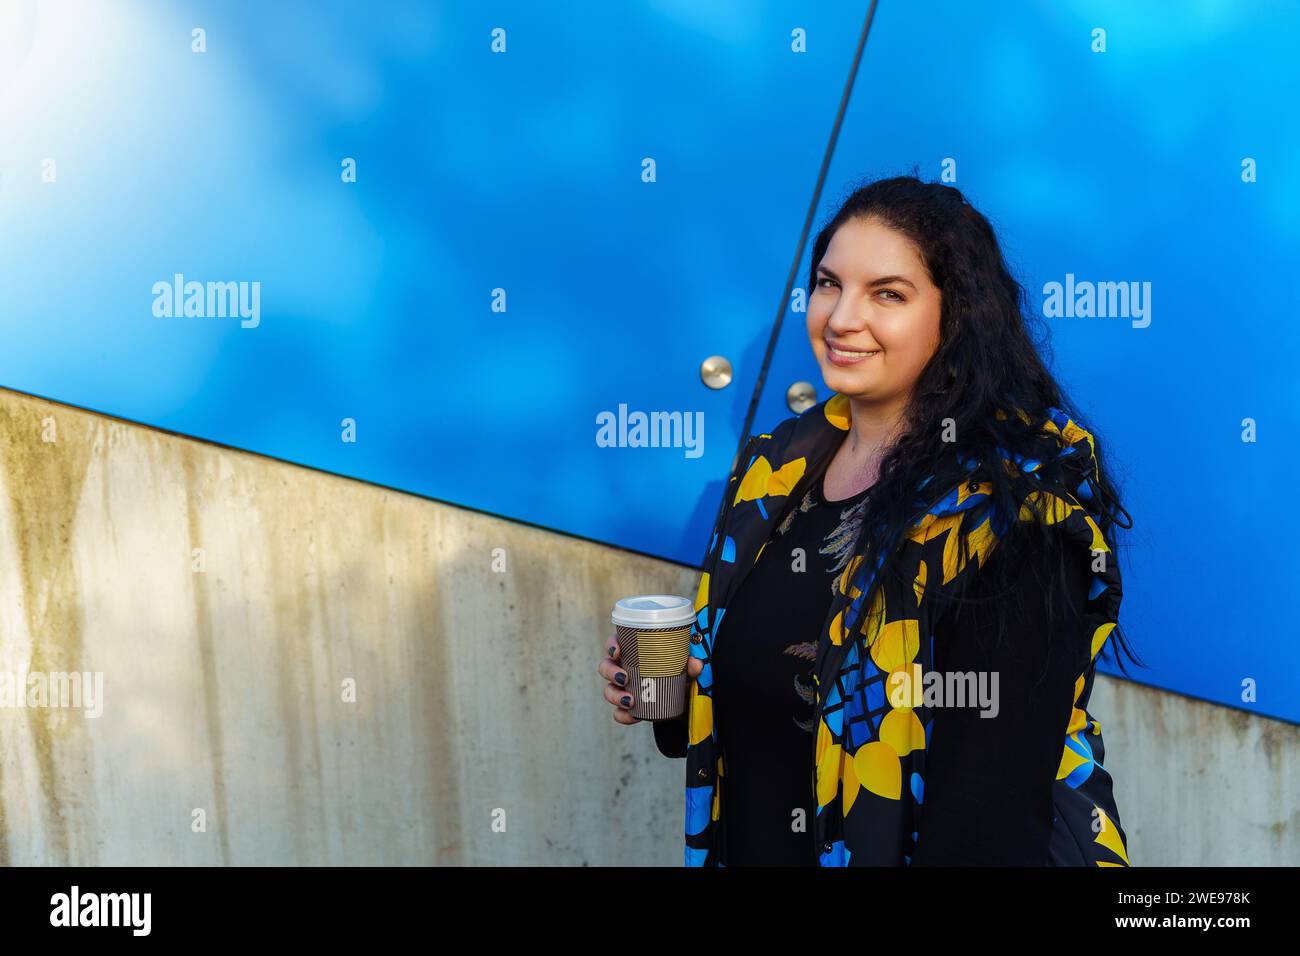 Beautiful young brunette woman with long curly hair, dressed in a black, blue and yellow waistcoat, drinks coffee from a paper cup on a background of Stock Photo